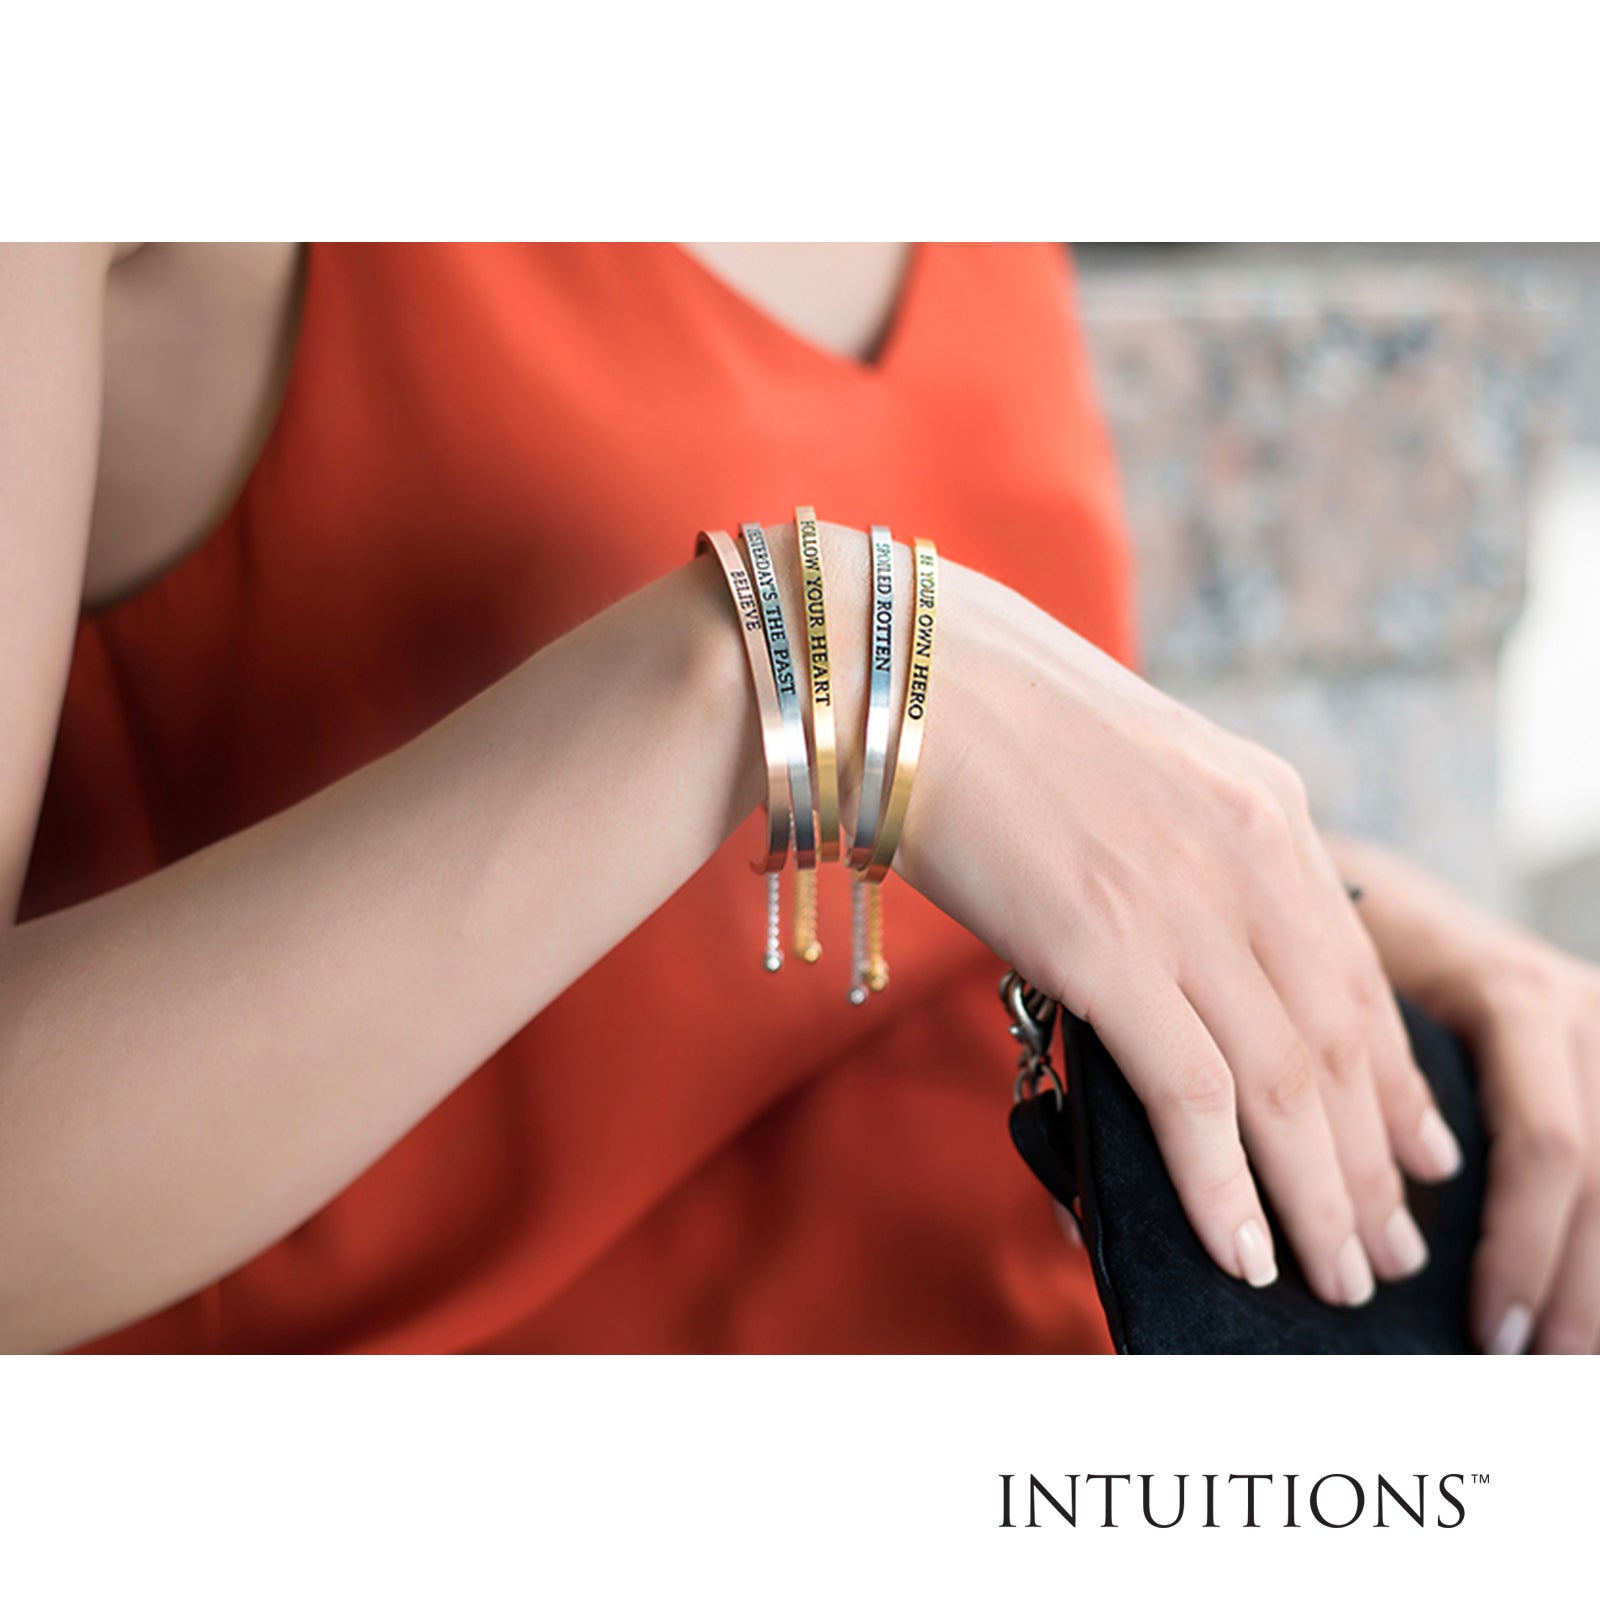 Intuitions Stainless Steel LOVE YOURSELF Diamond Accent Adjustable Bracelet